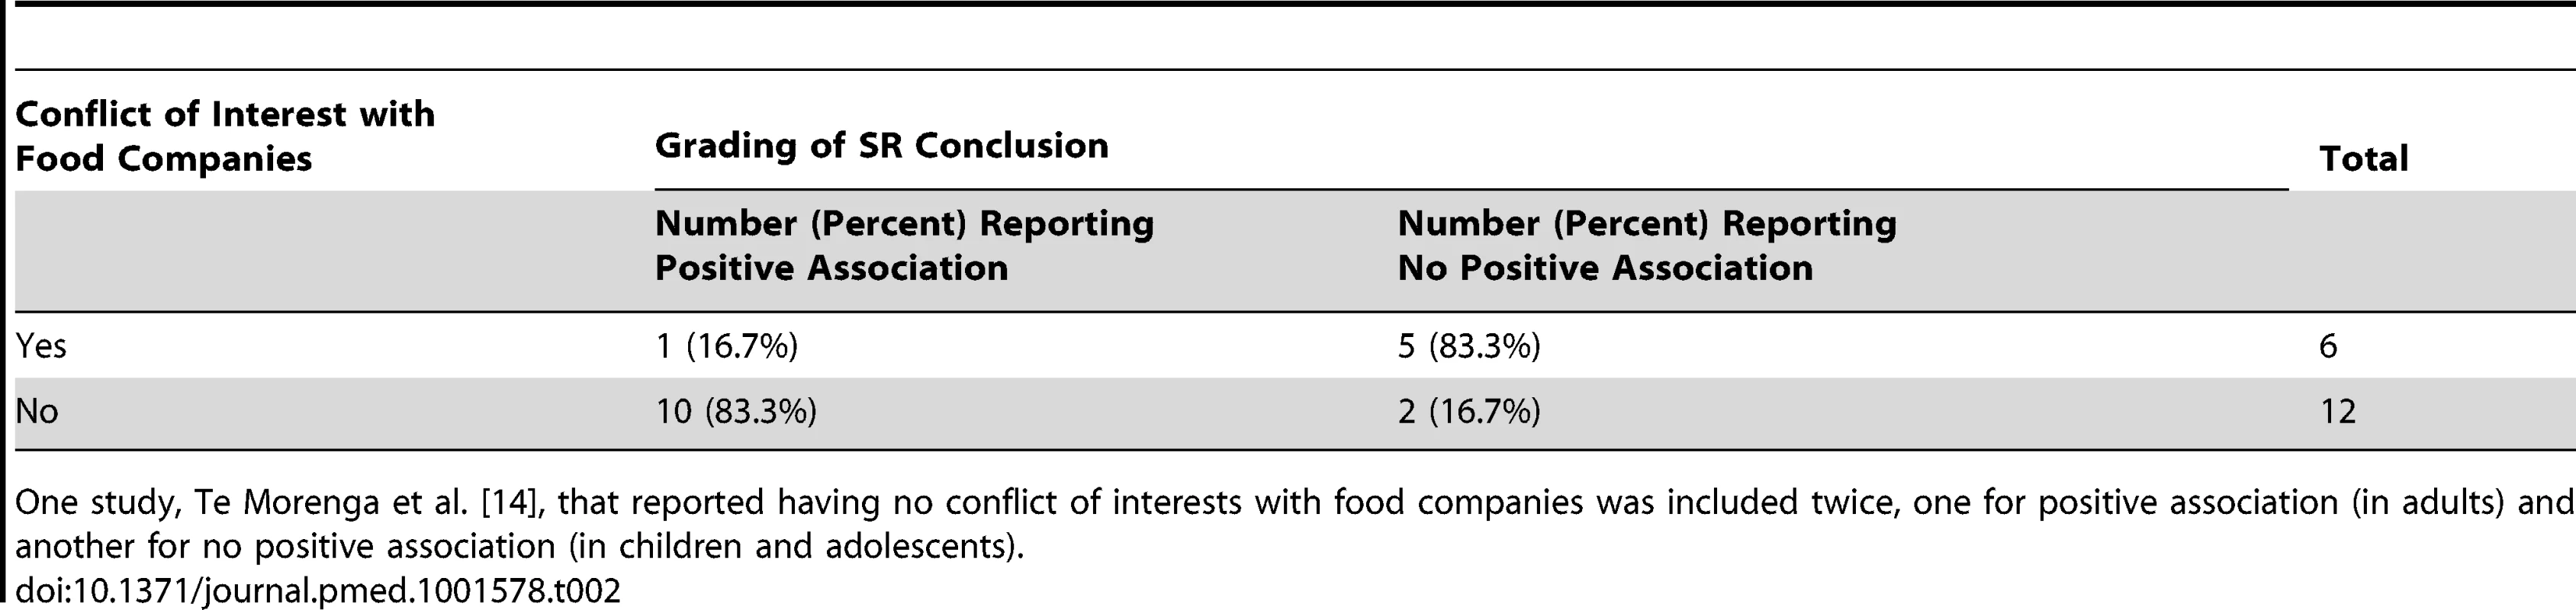 Relationship between conflicts of interest with food companies and conclusions on sugar-sweetened beverage consumption and weight gain in the systematic reviews conducted up to August 31, 2013.